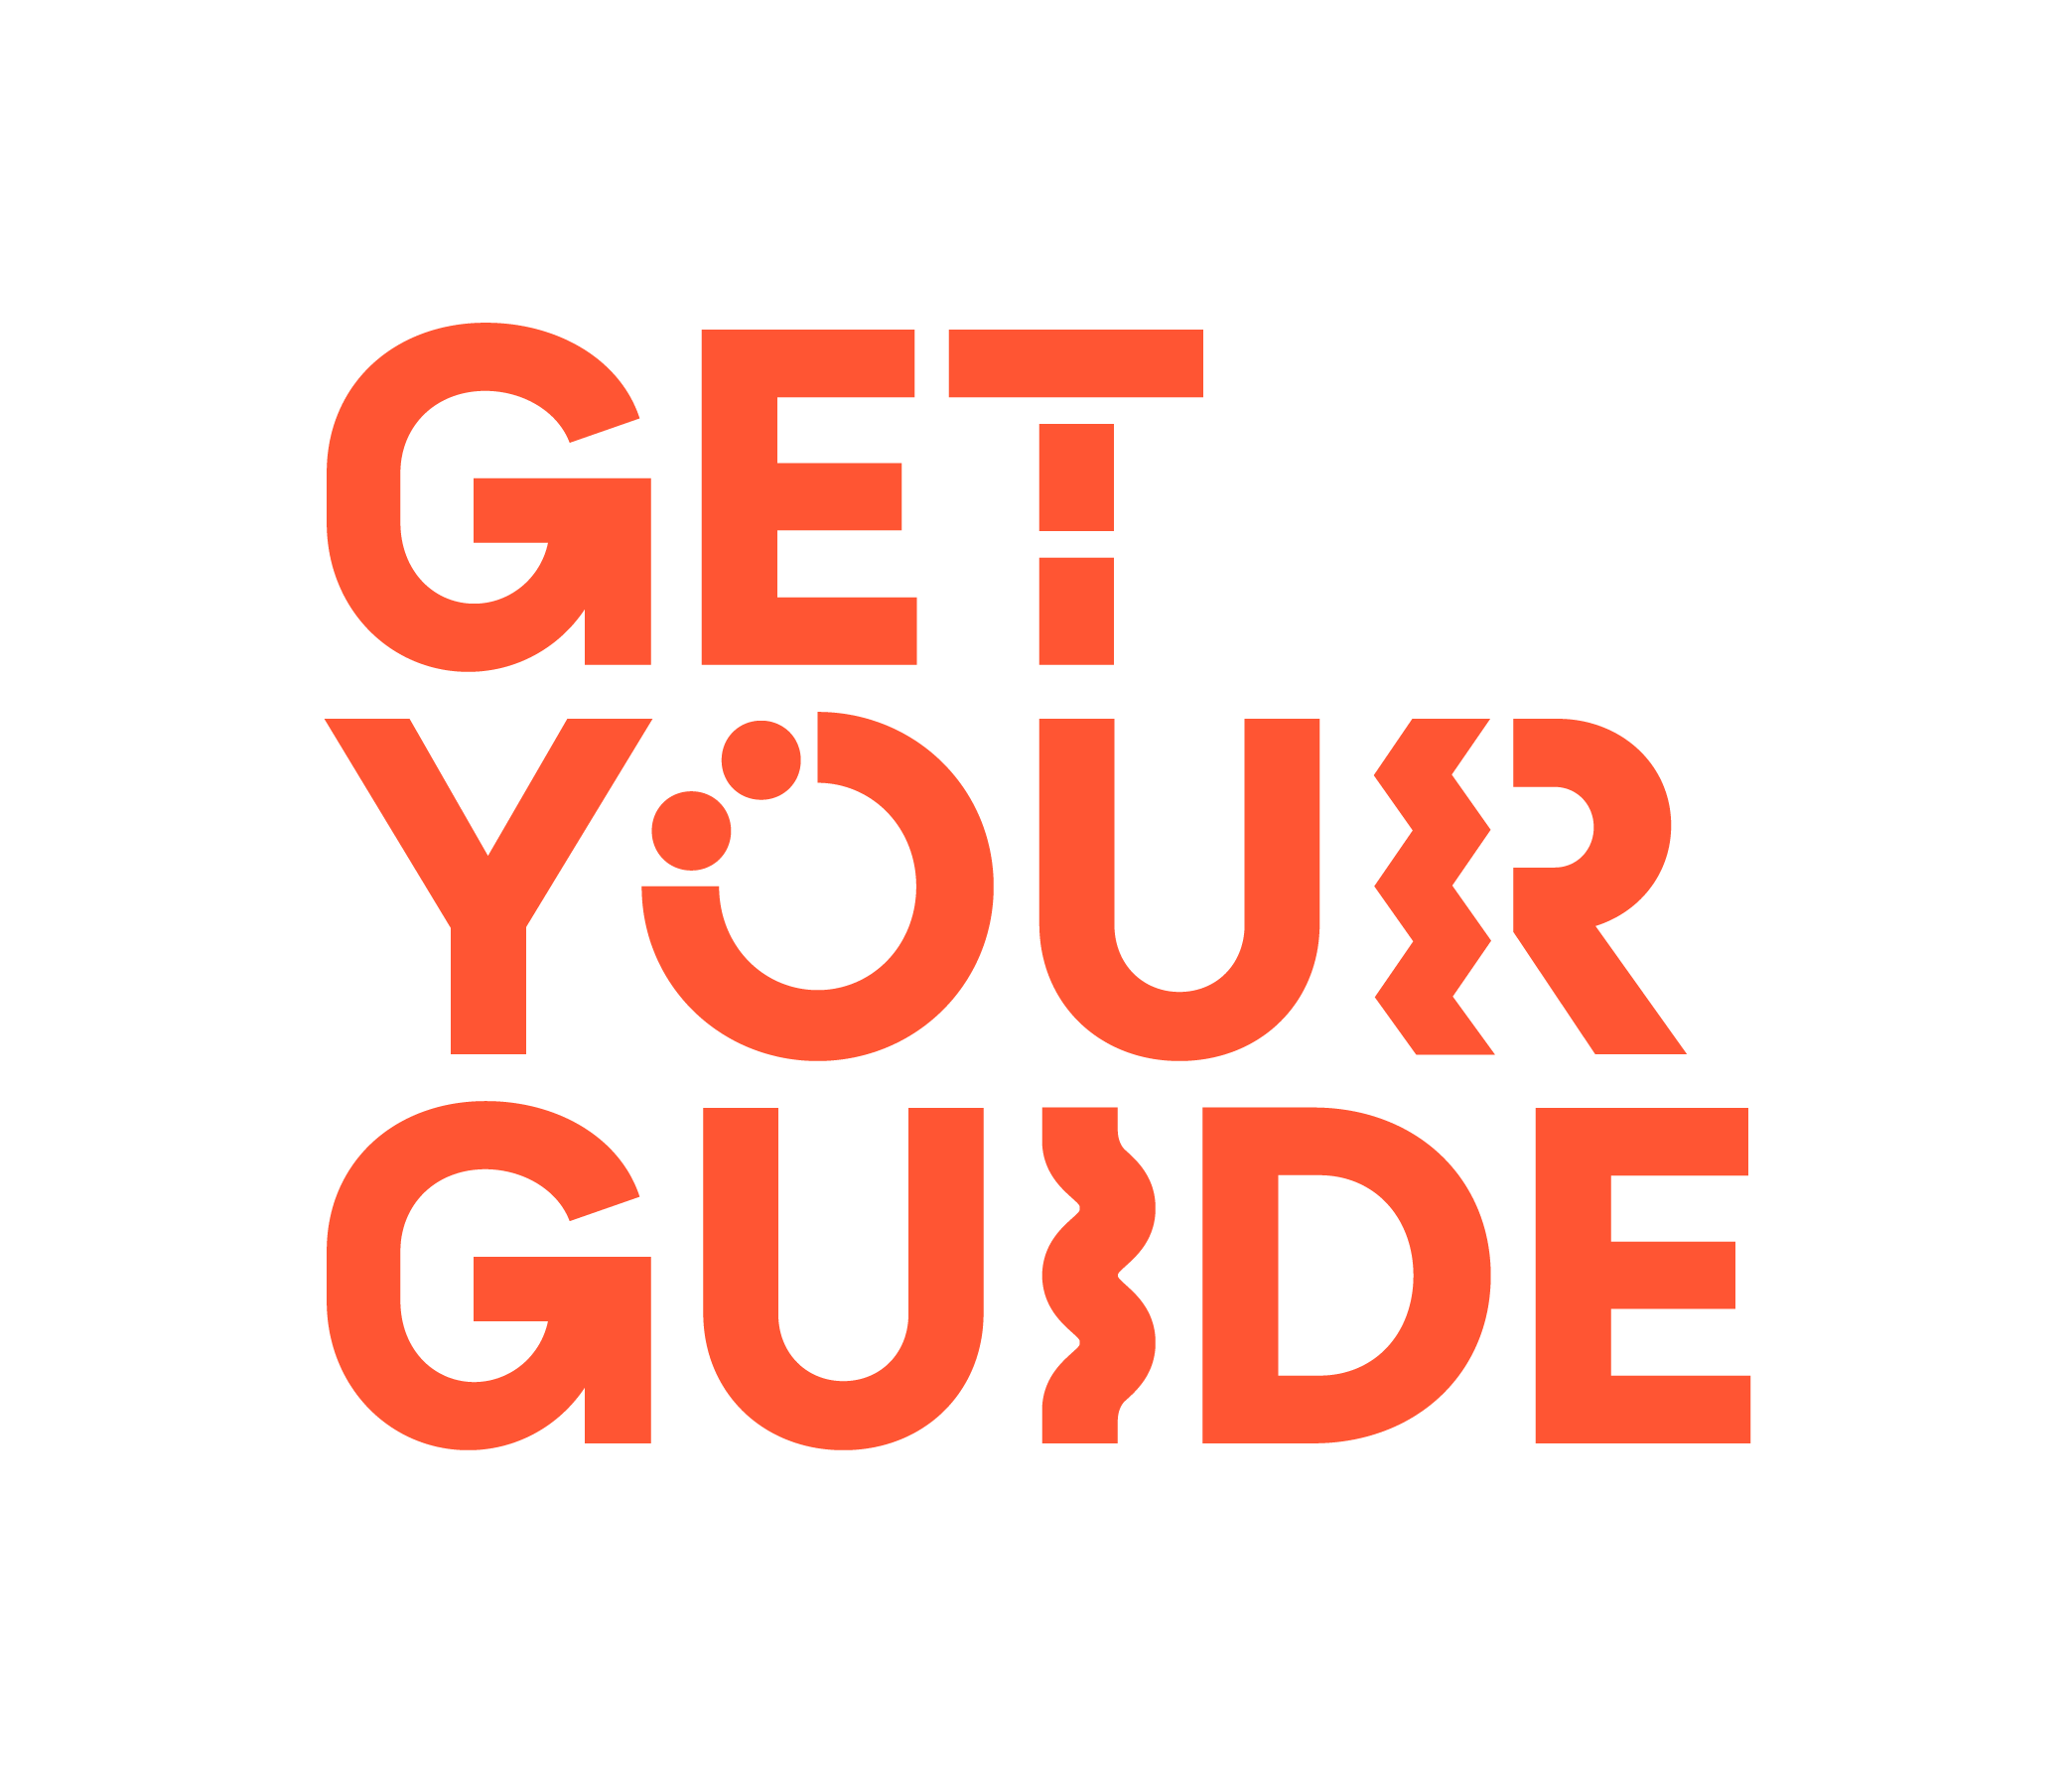 GetYourGuide Promo Codes Pakistan 